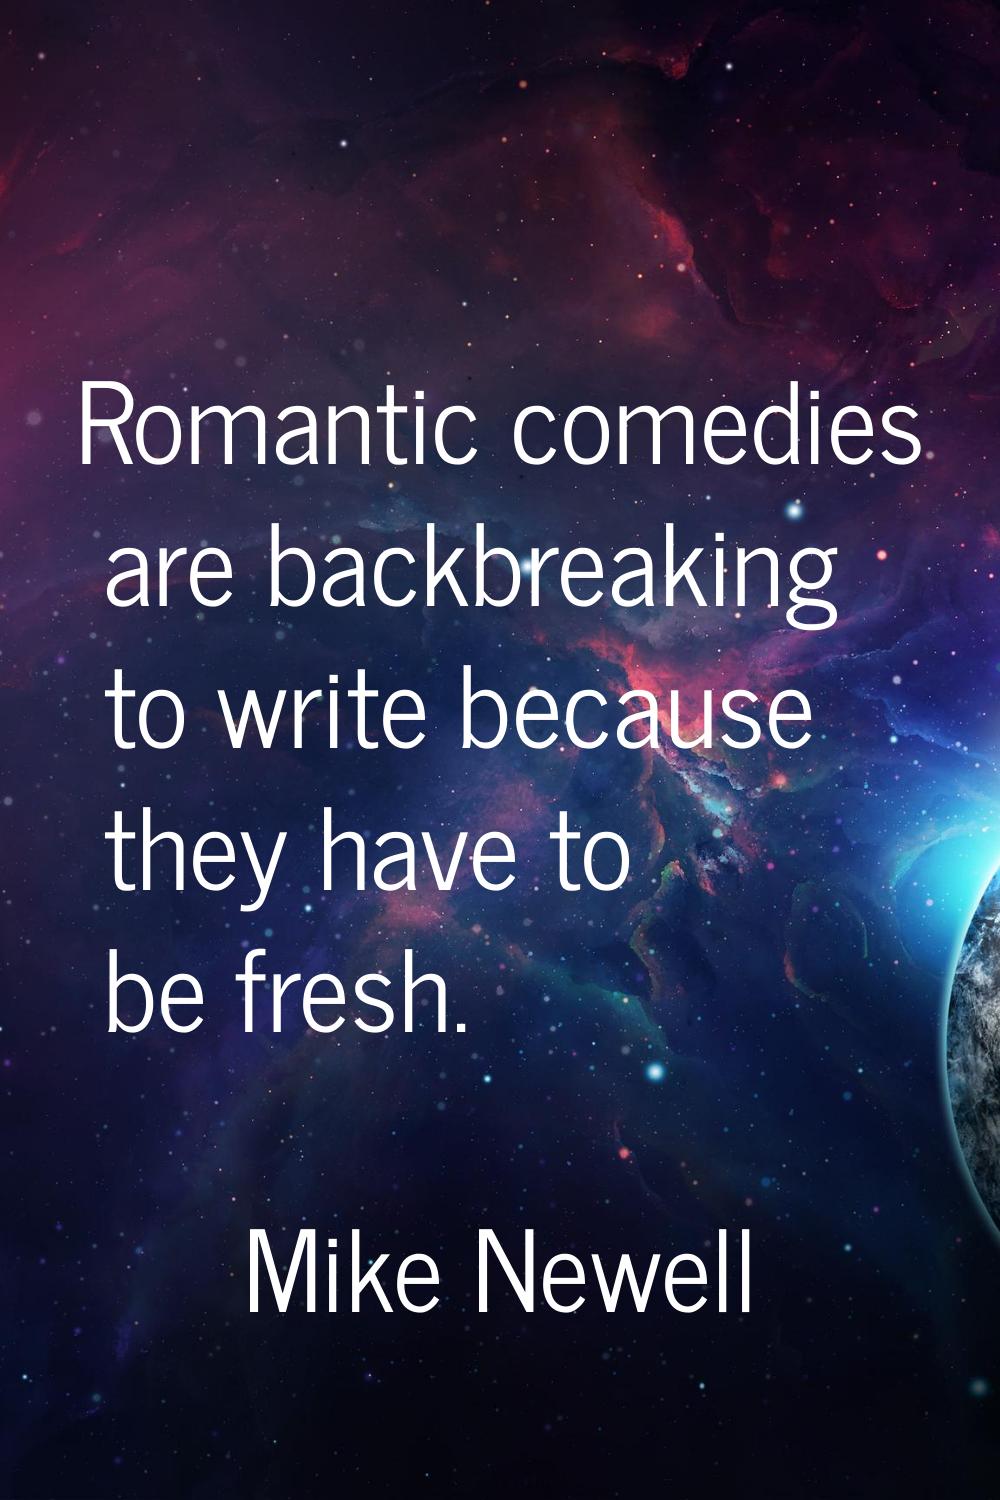 Romantic comedies are backbreaking to write because they have to be fresh.